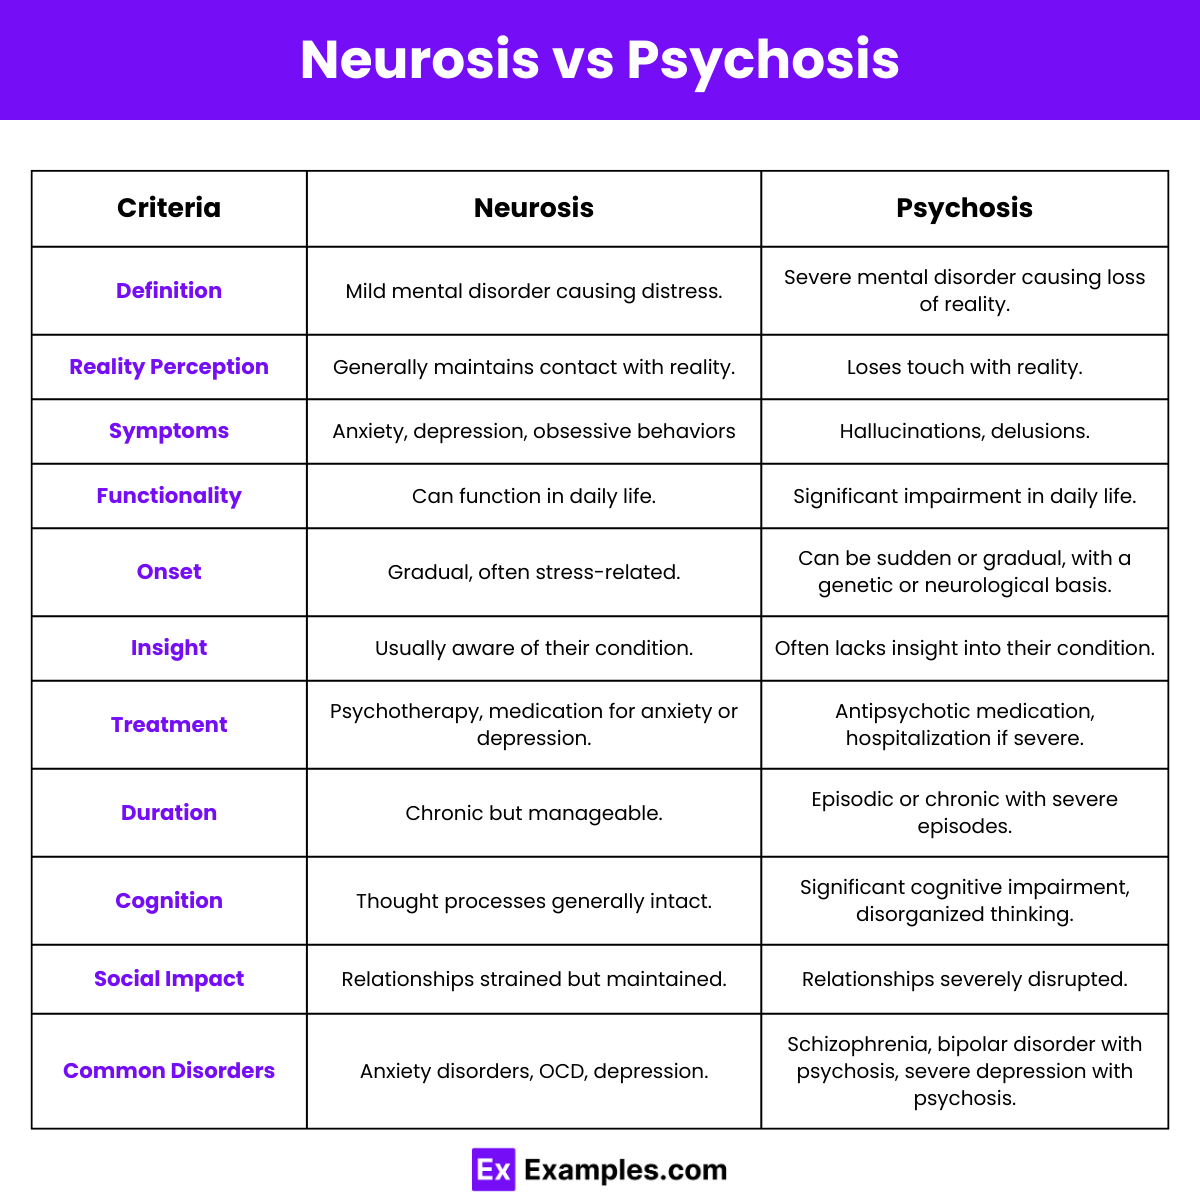 Differences Between Neurosis and Psychosis